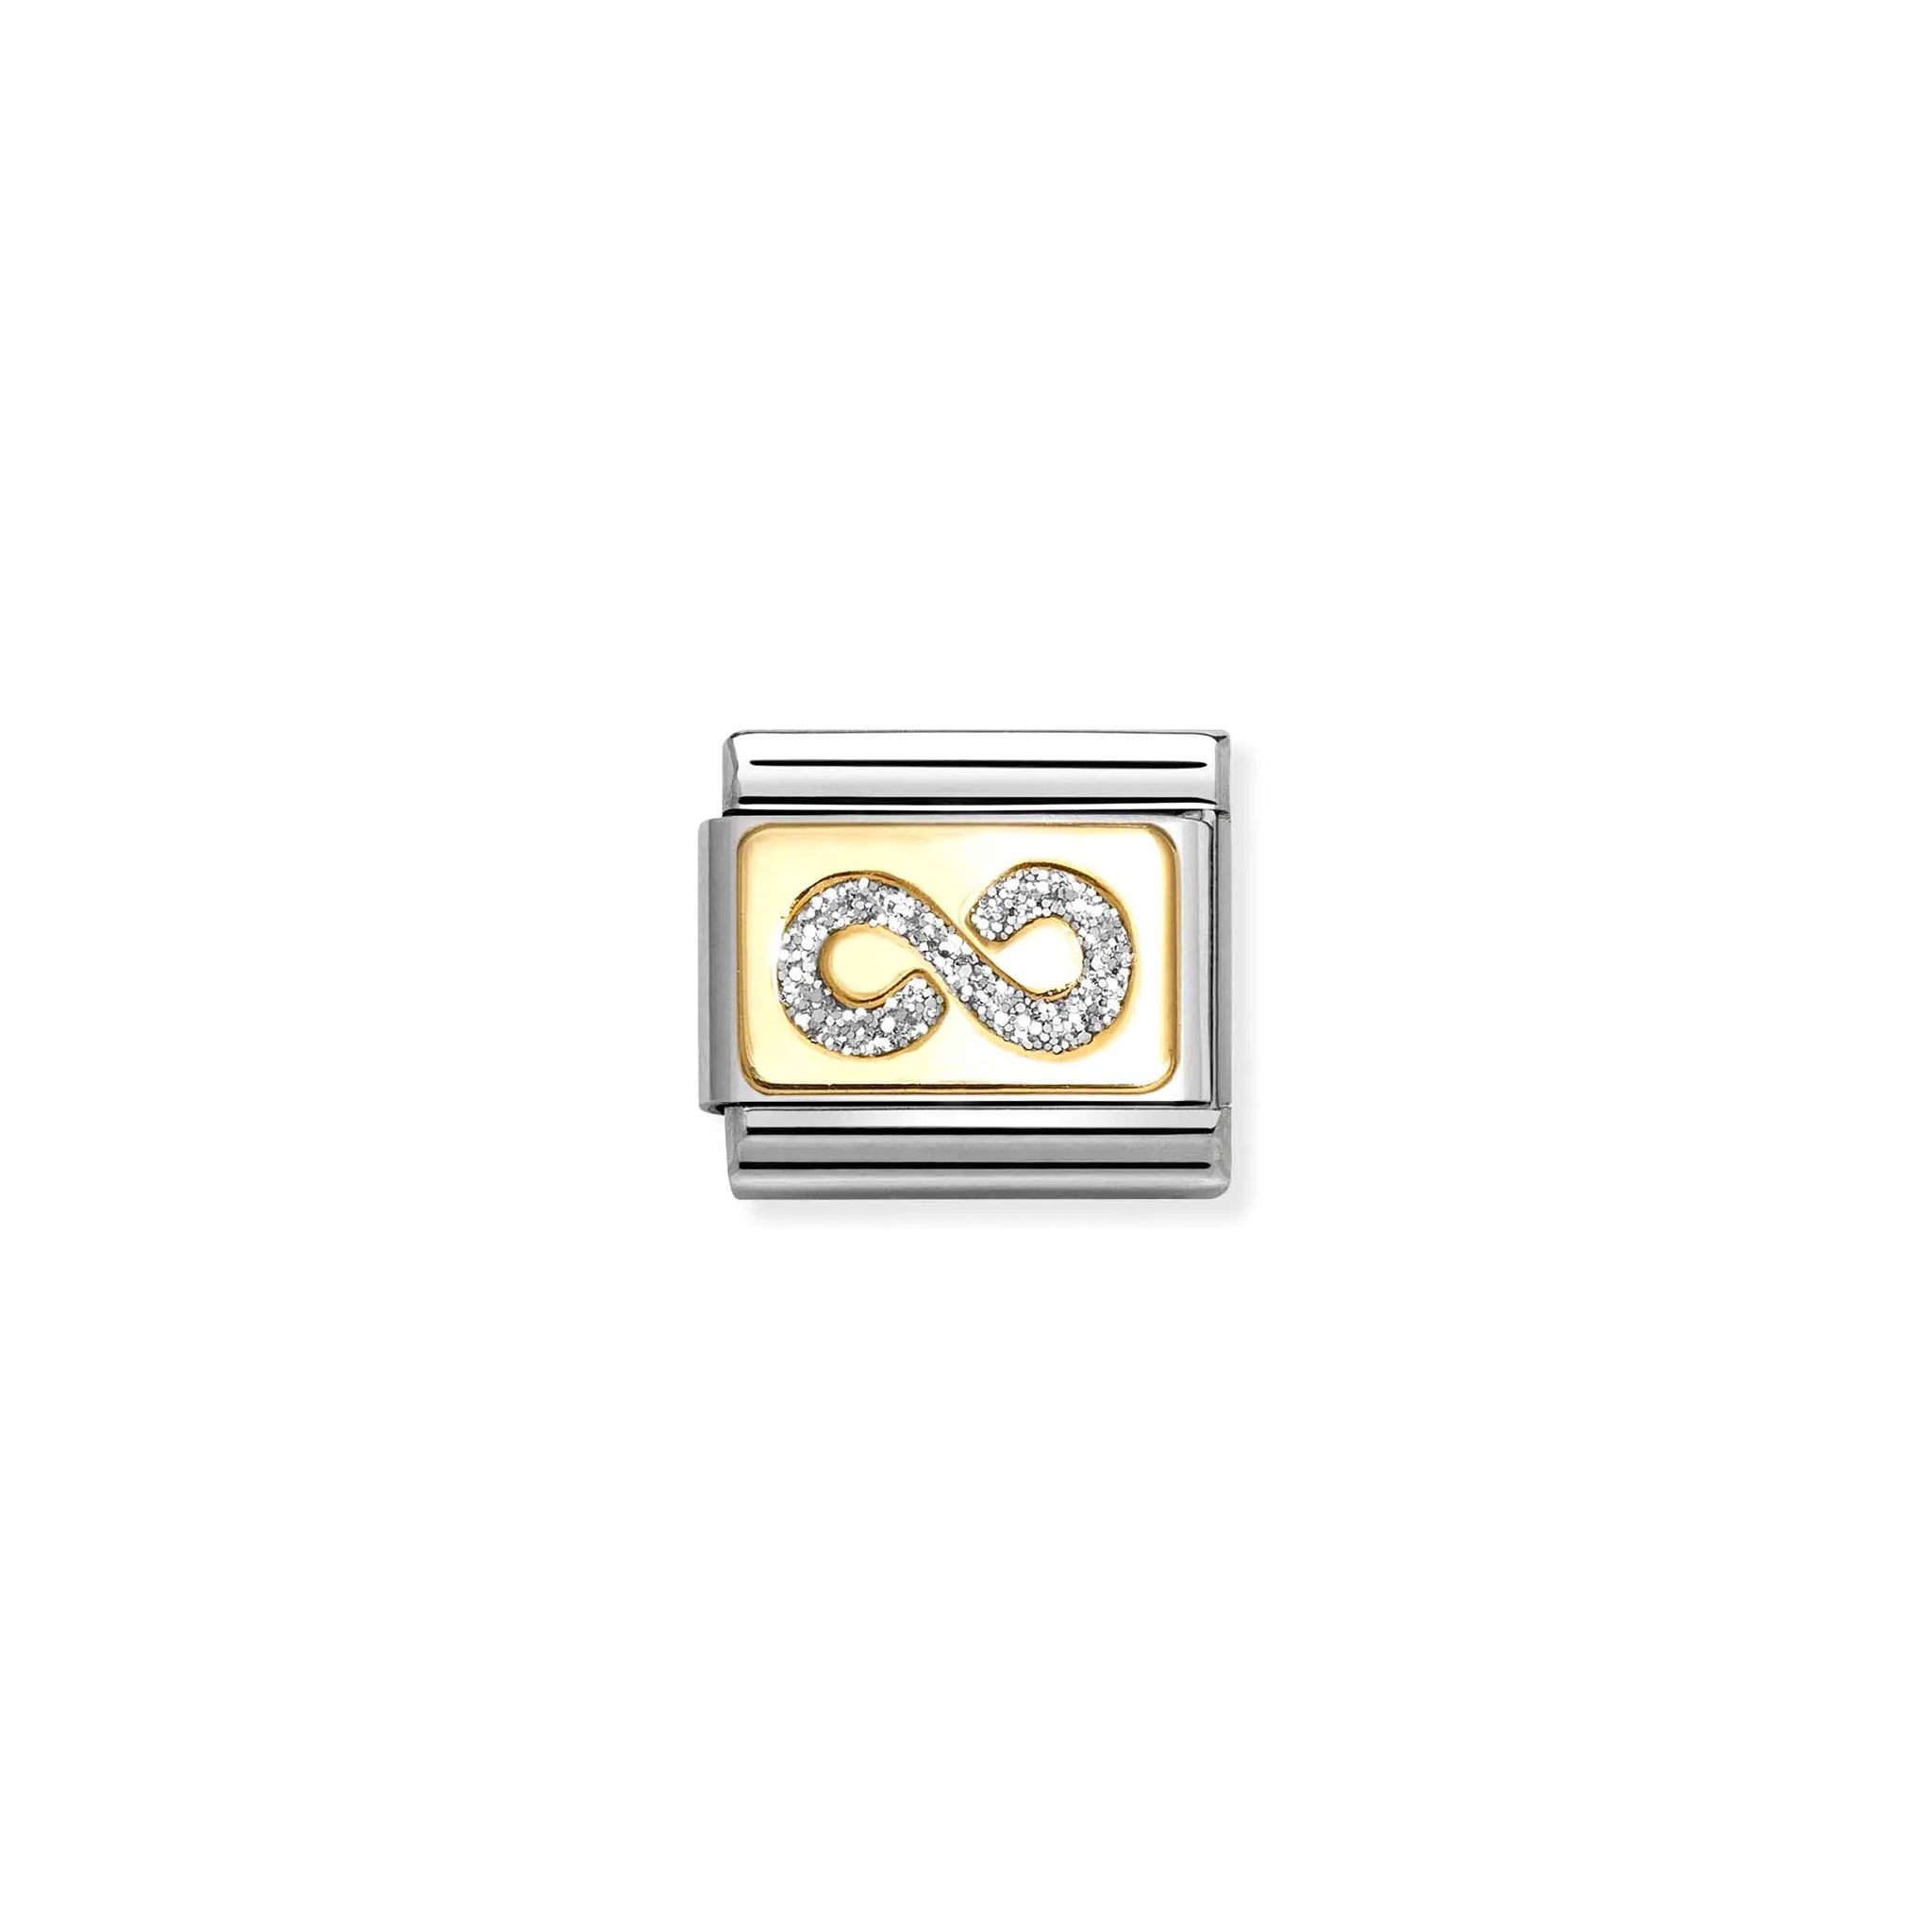 A Nomination charm link with gold plaque and silver glitter infinity symbol